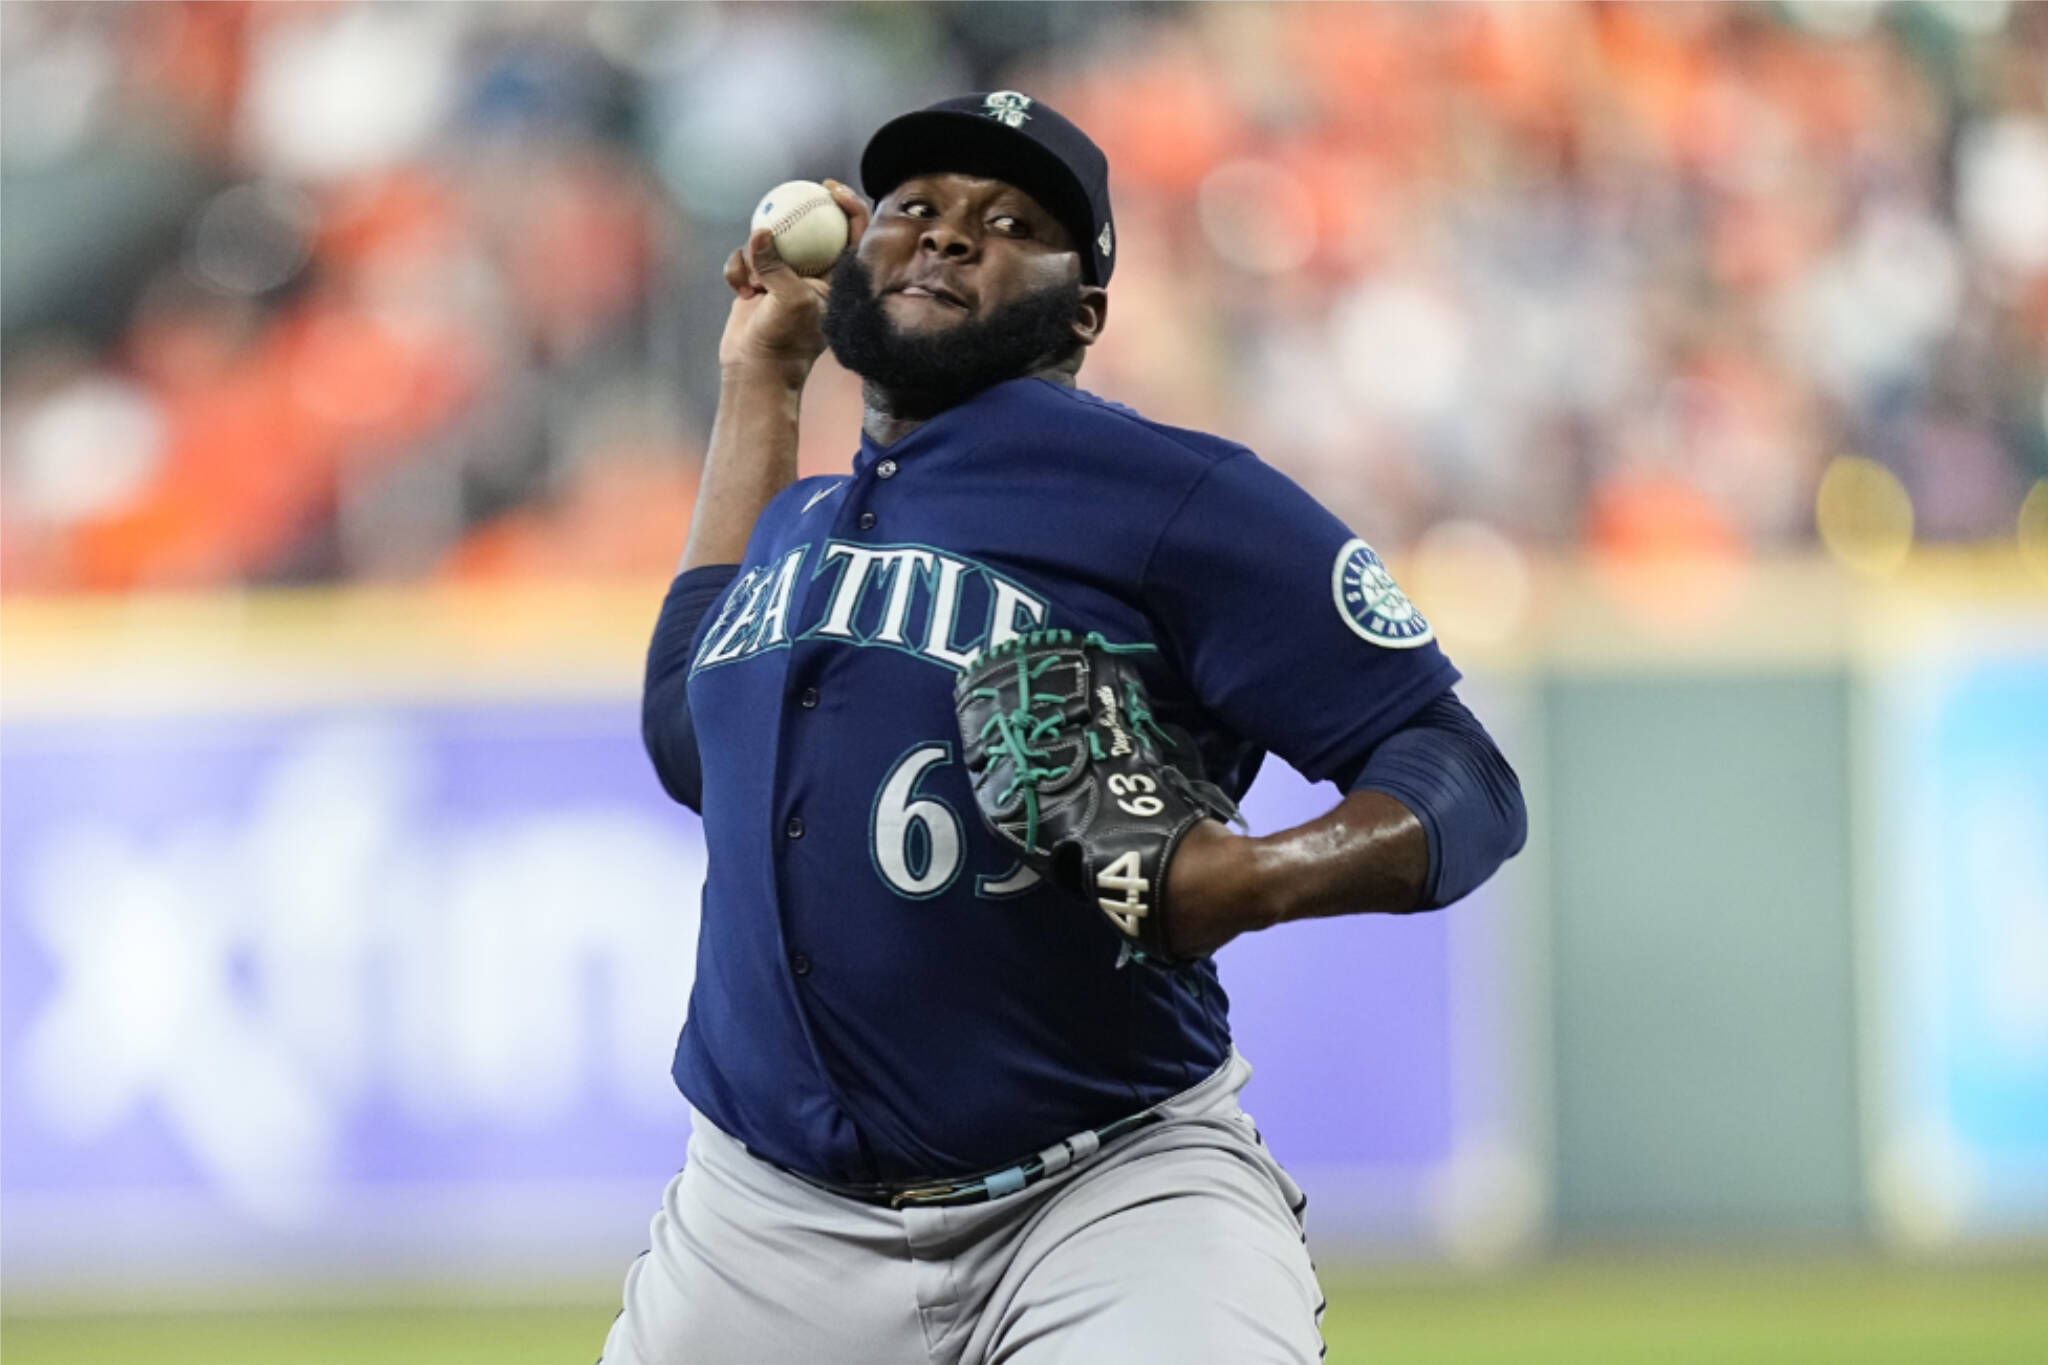 Seattle Mariners relief pitcher Diego Castillo delivers a pitch against the Houston Astros during the seventh inning in Game 1 of an American League Division Series game in Houston, Tuesday, Oct. 11, 2022. (AP Photo/Kevin M. Cox, File)